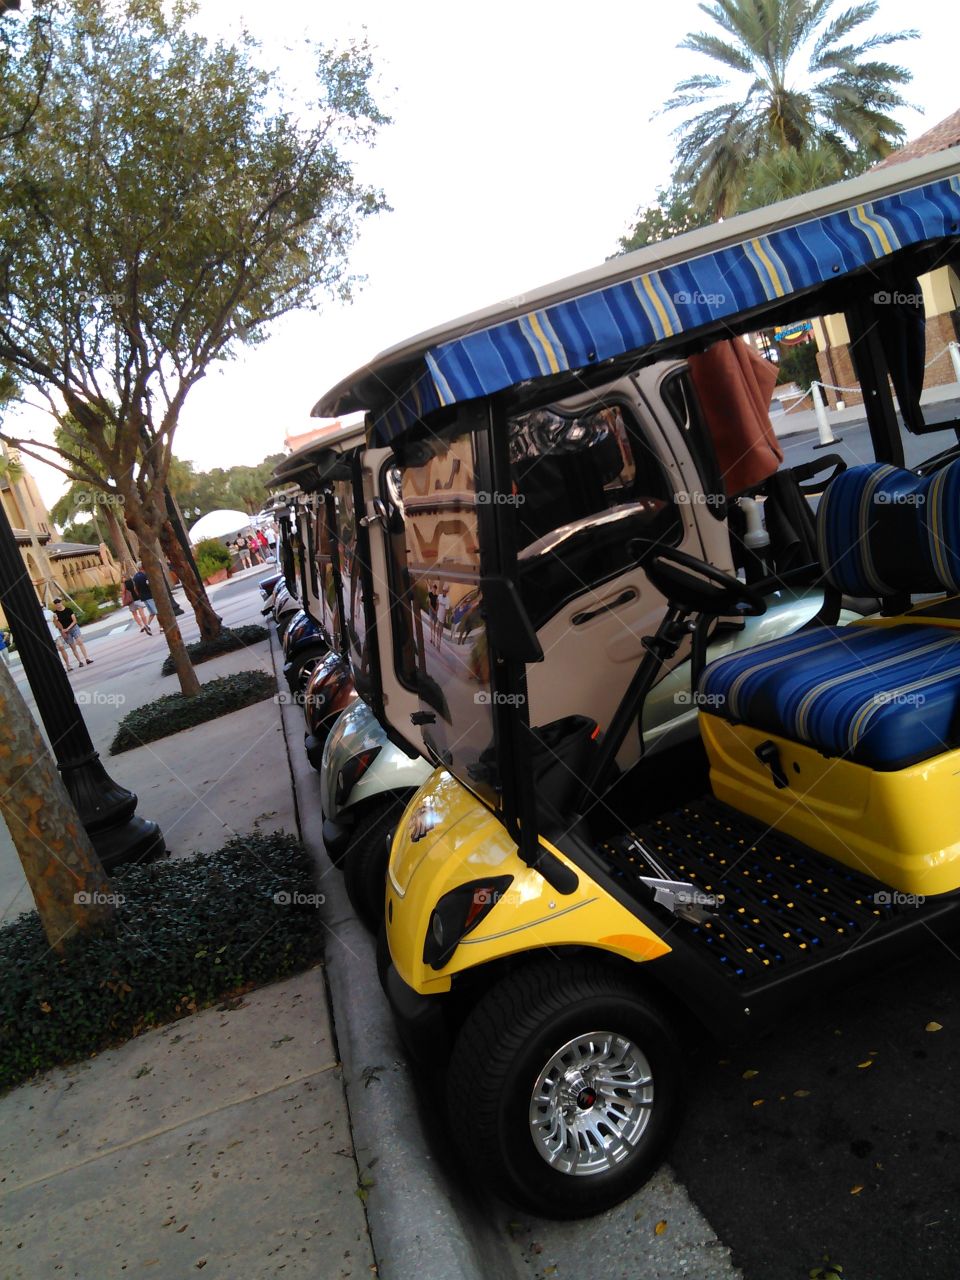 Golf Carts...the way to go.... This is how it's done in The Villages, Florida.